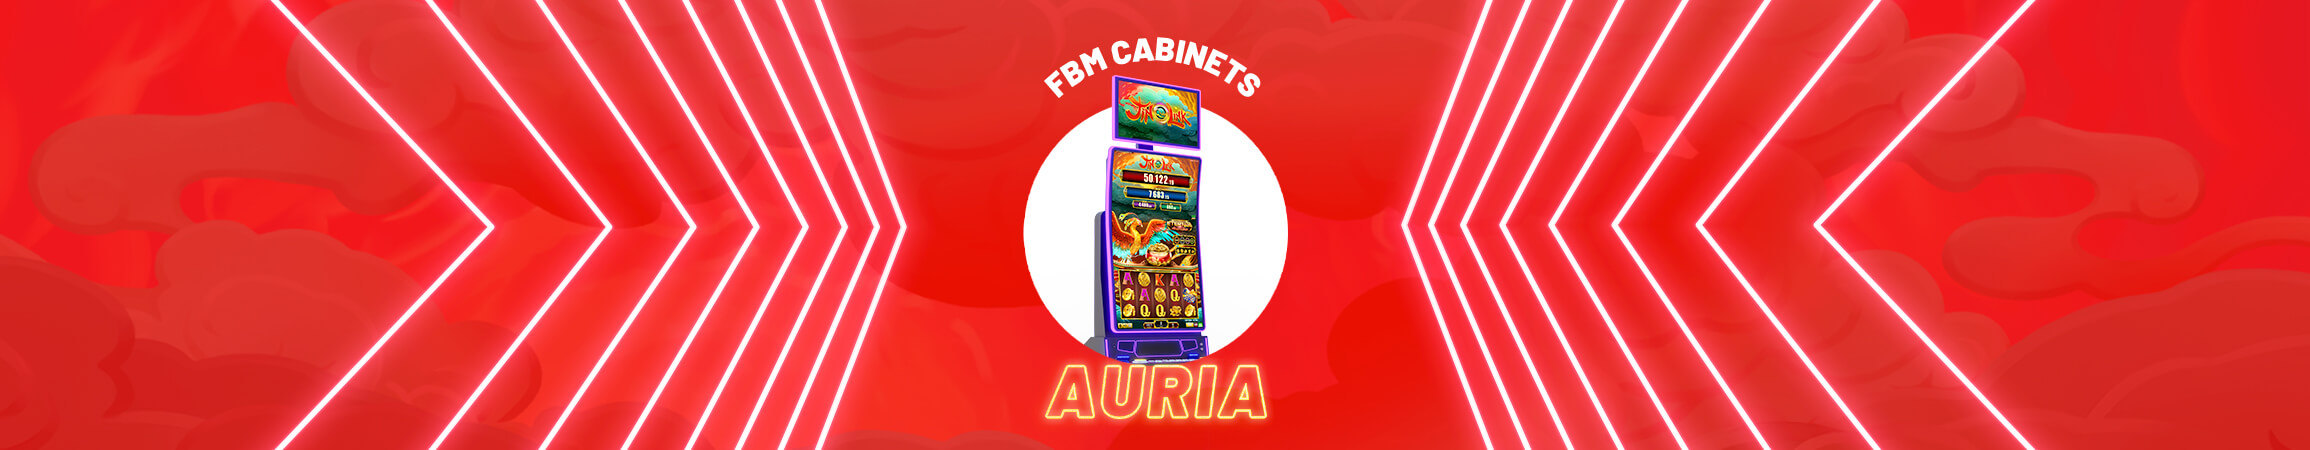 The Ultimate Casino Gaming Cabinet: Auria®️ by FBM®️